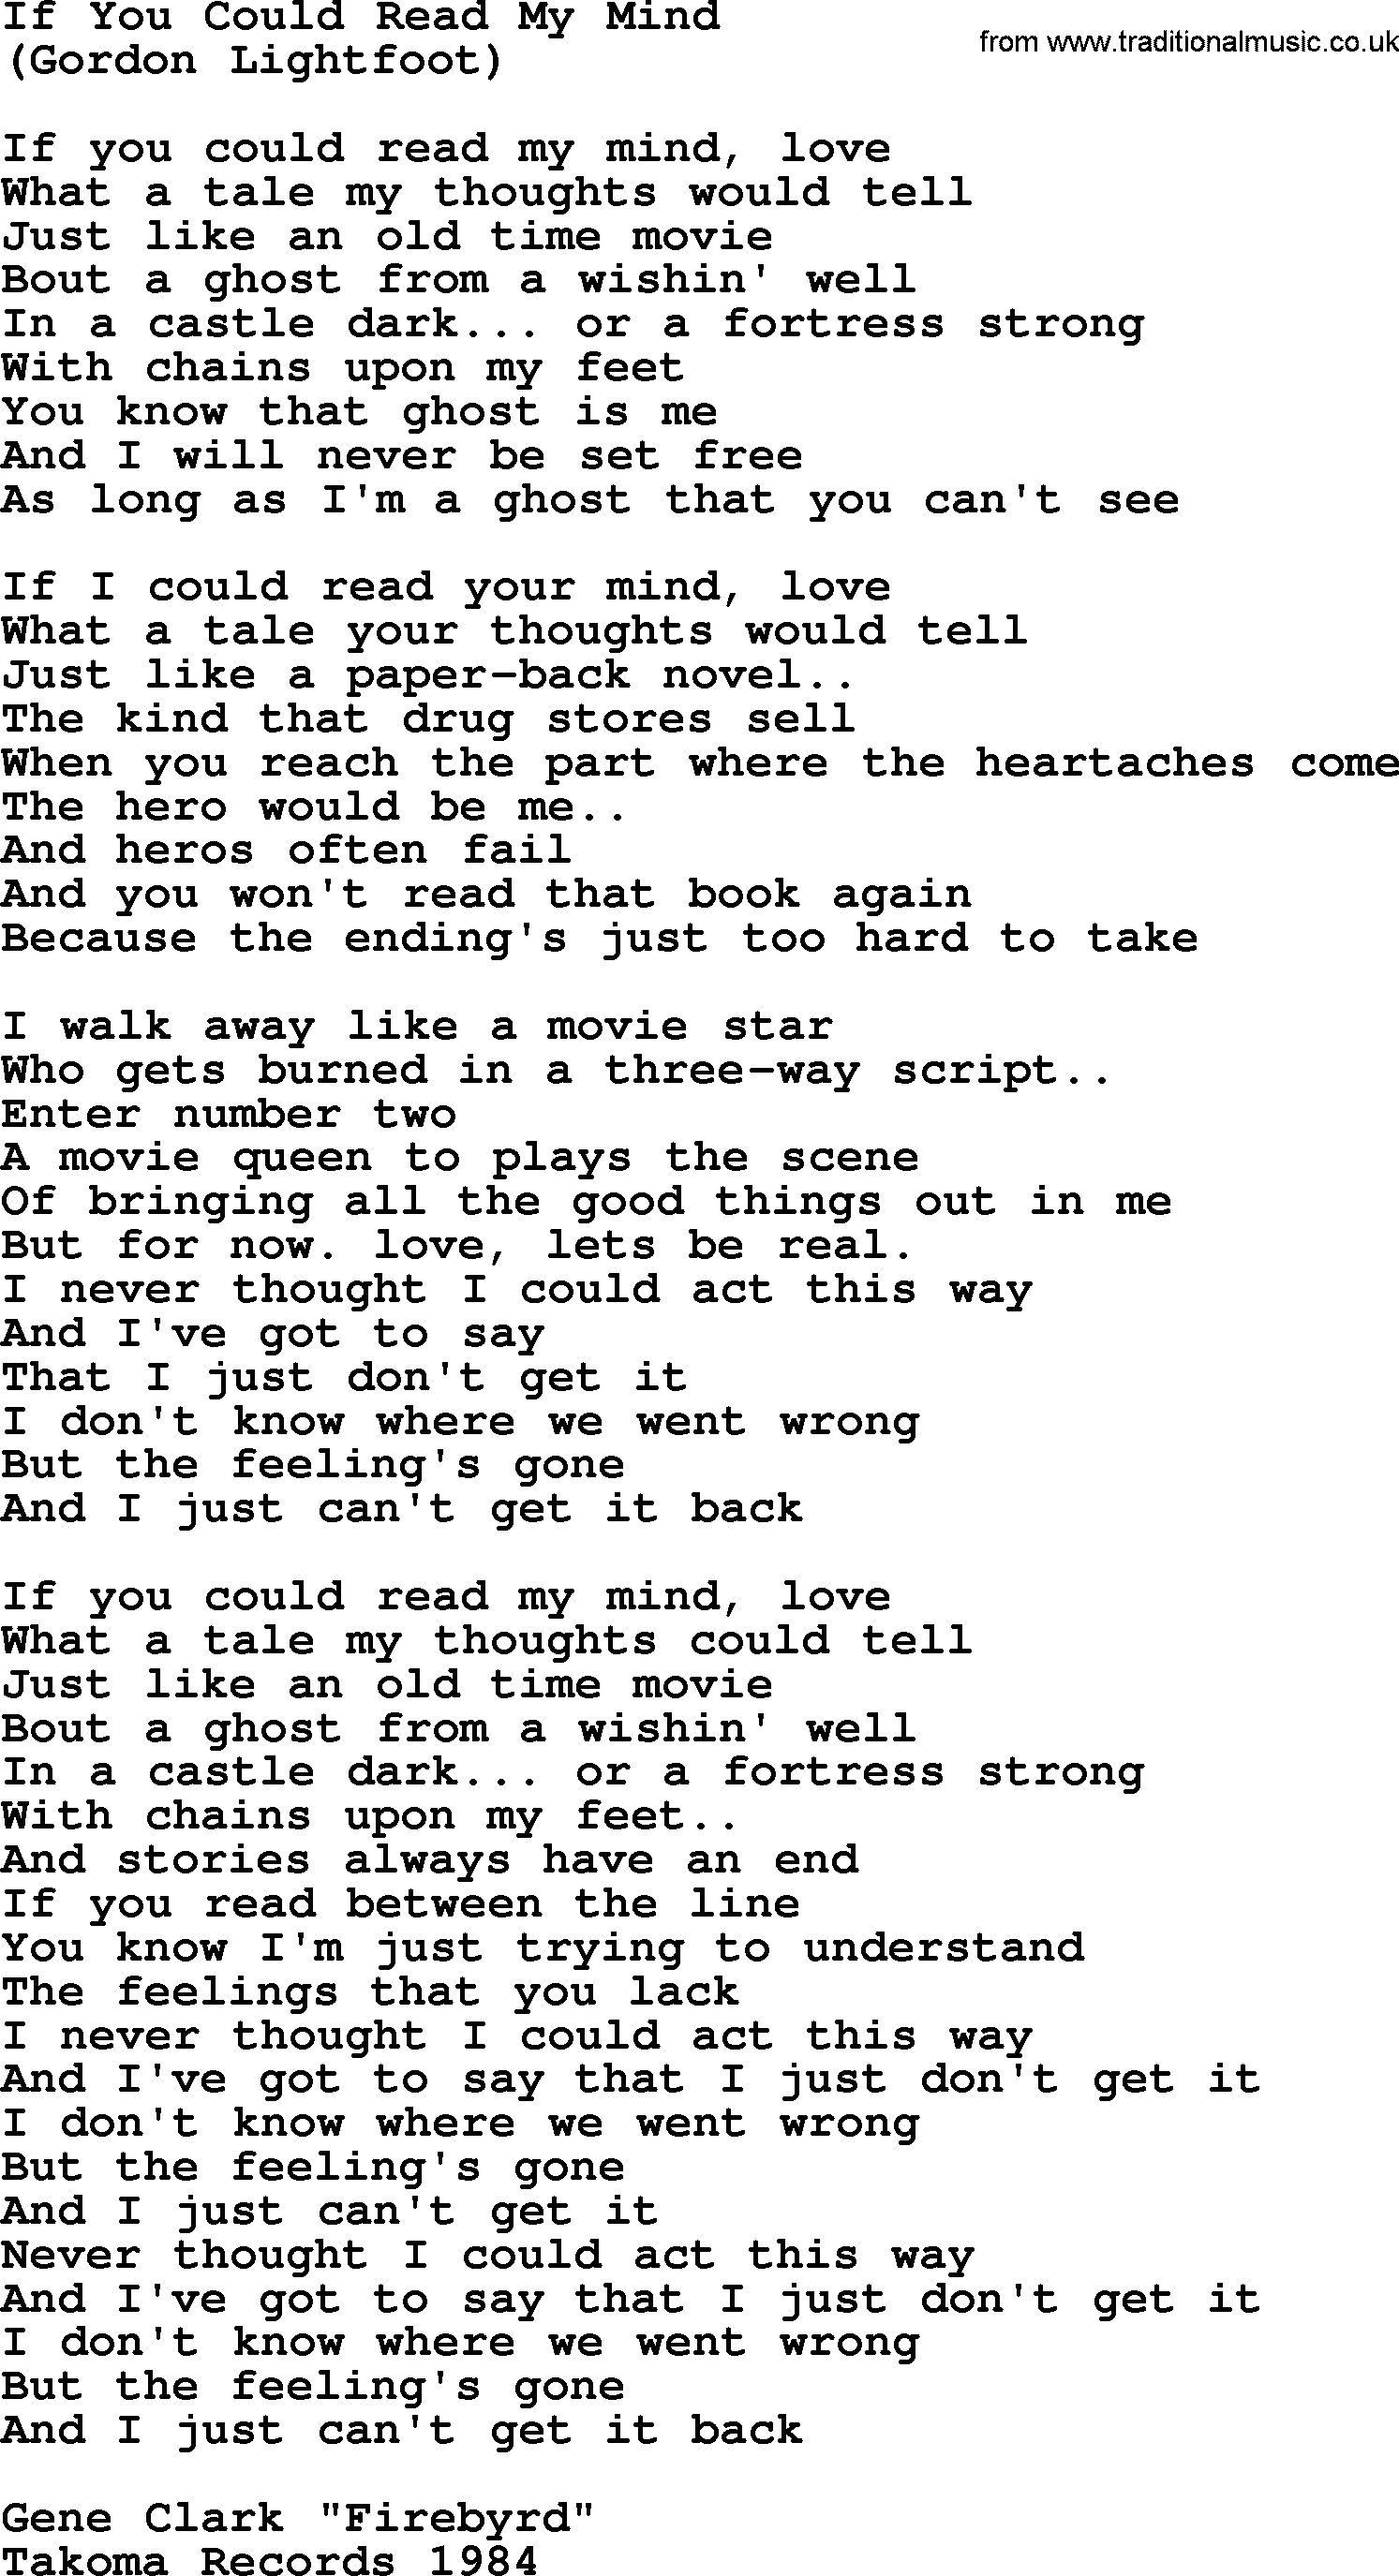 If You Could Read My Mind, by The Byrds - lyrics with pdf